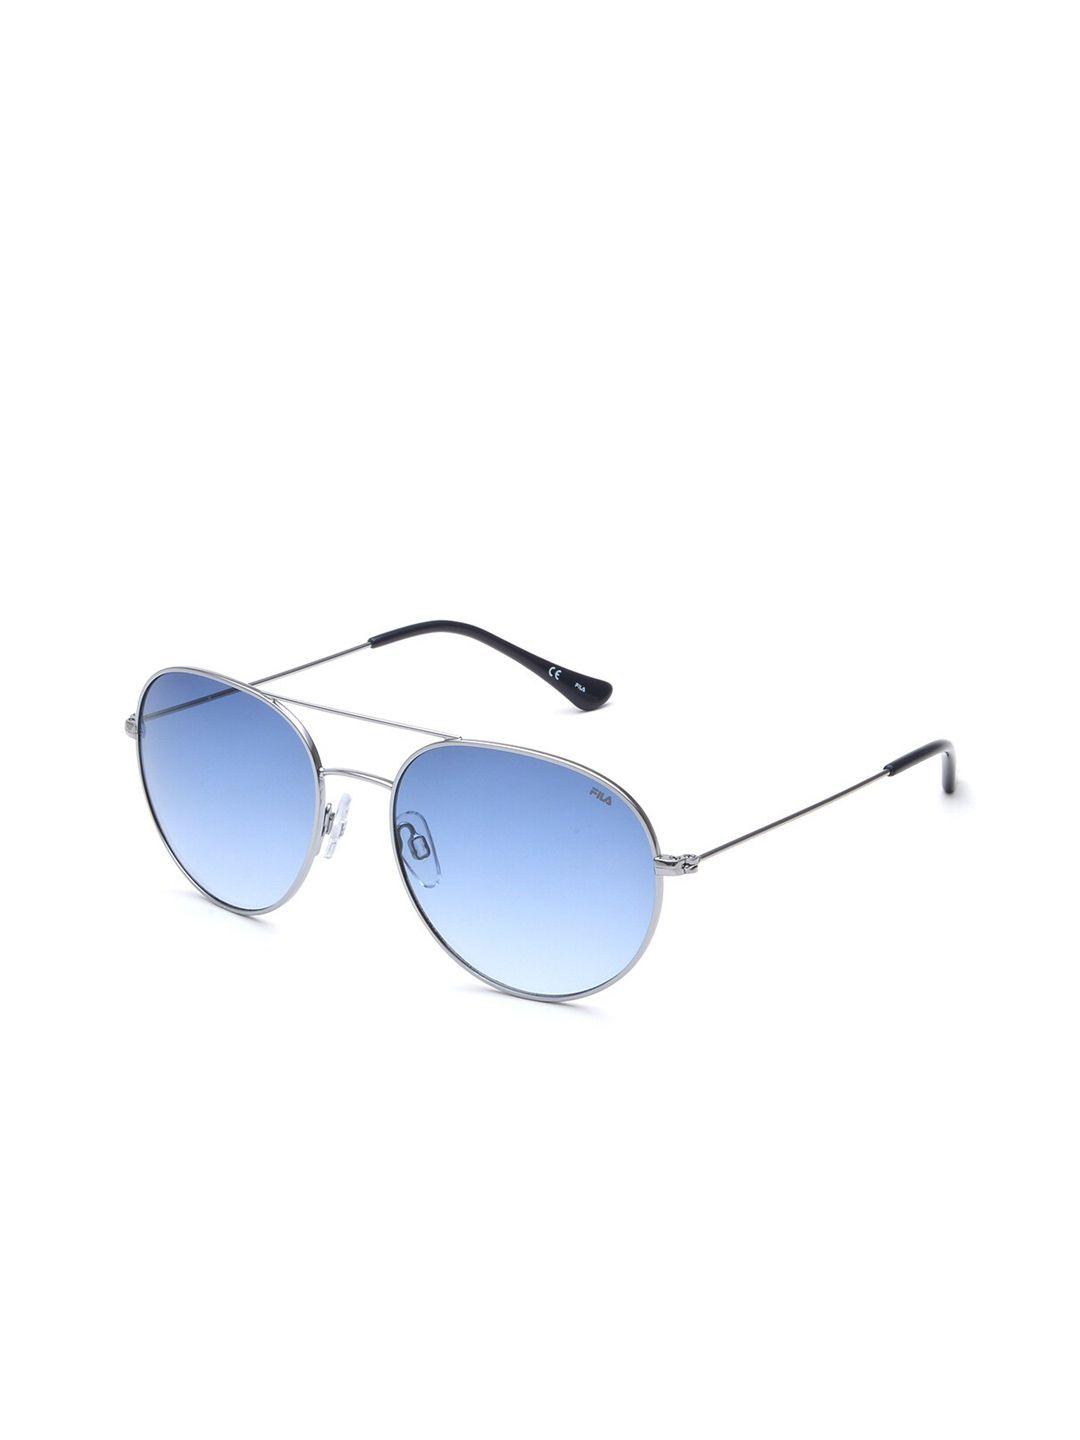 fila men blue lens & silver-toned round sunglasses with uv protected lens